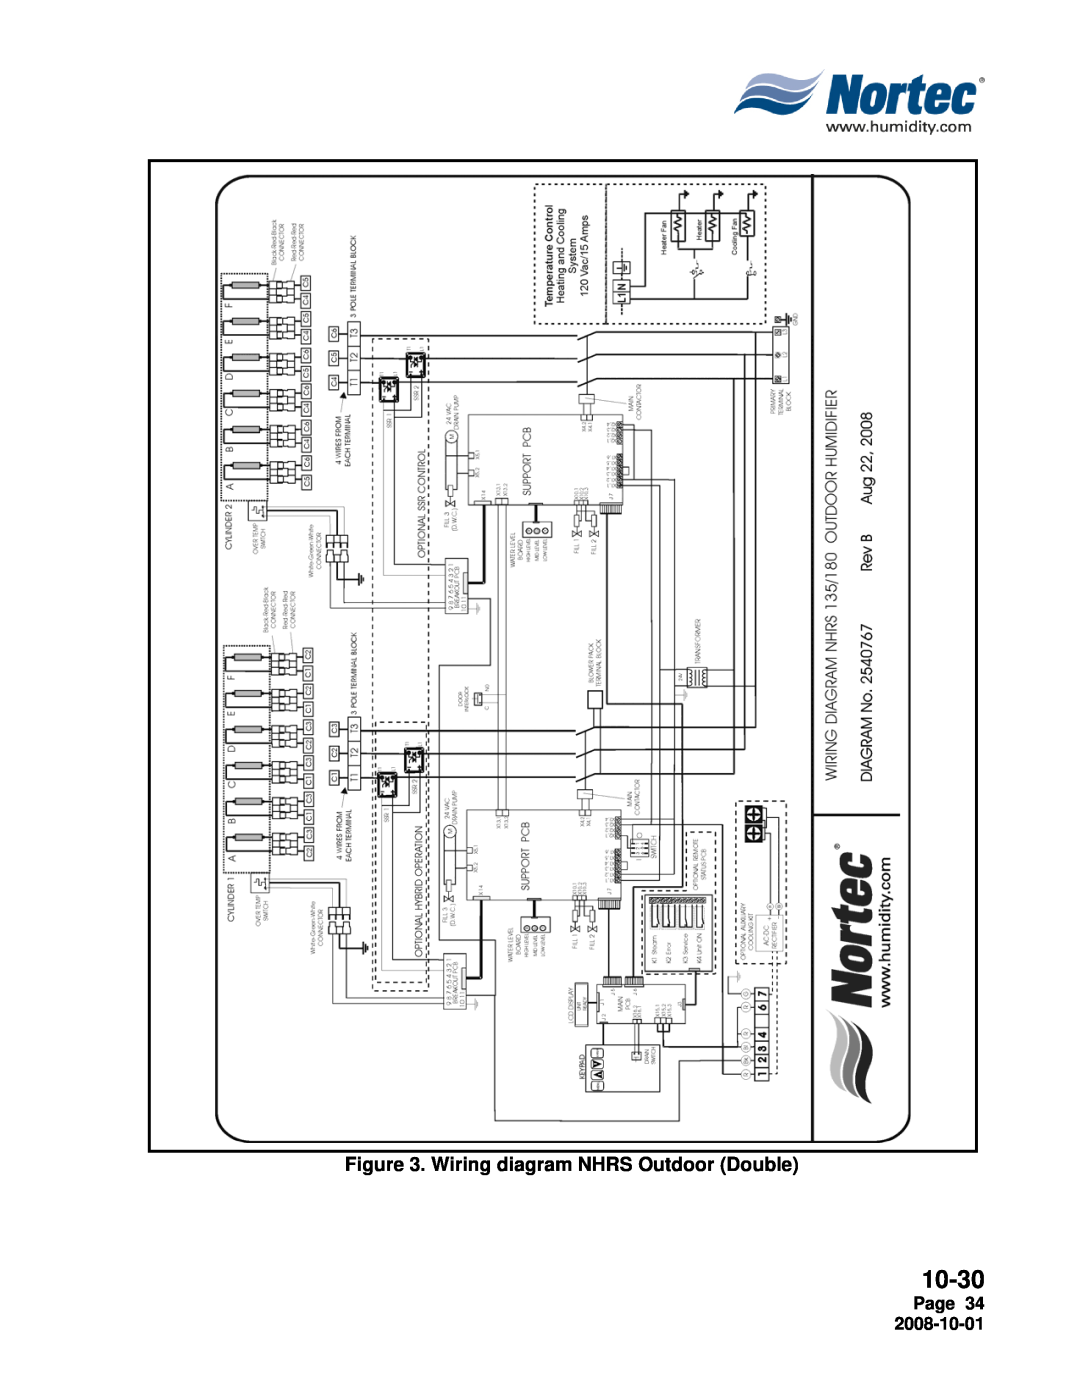 Nortec Industries NH Series installation manual Wiring diagram NHRS Outdoor Double, 10-30, Page 